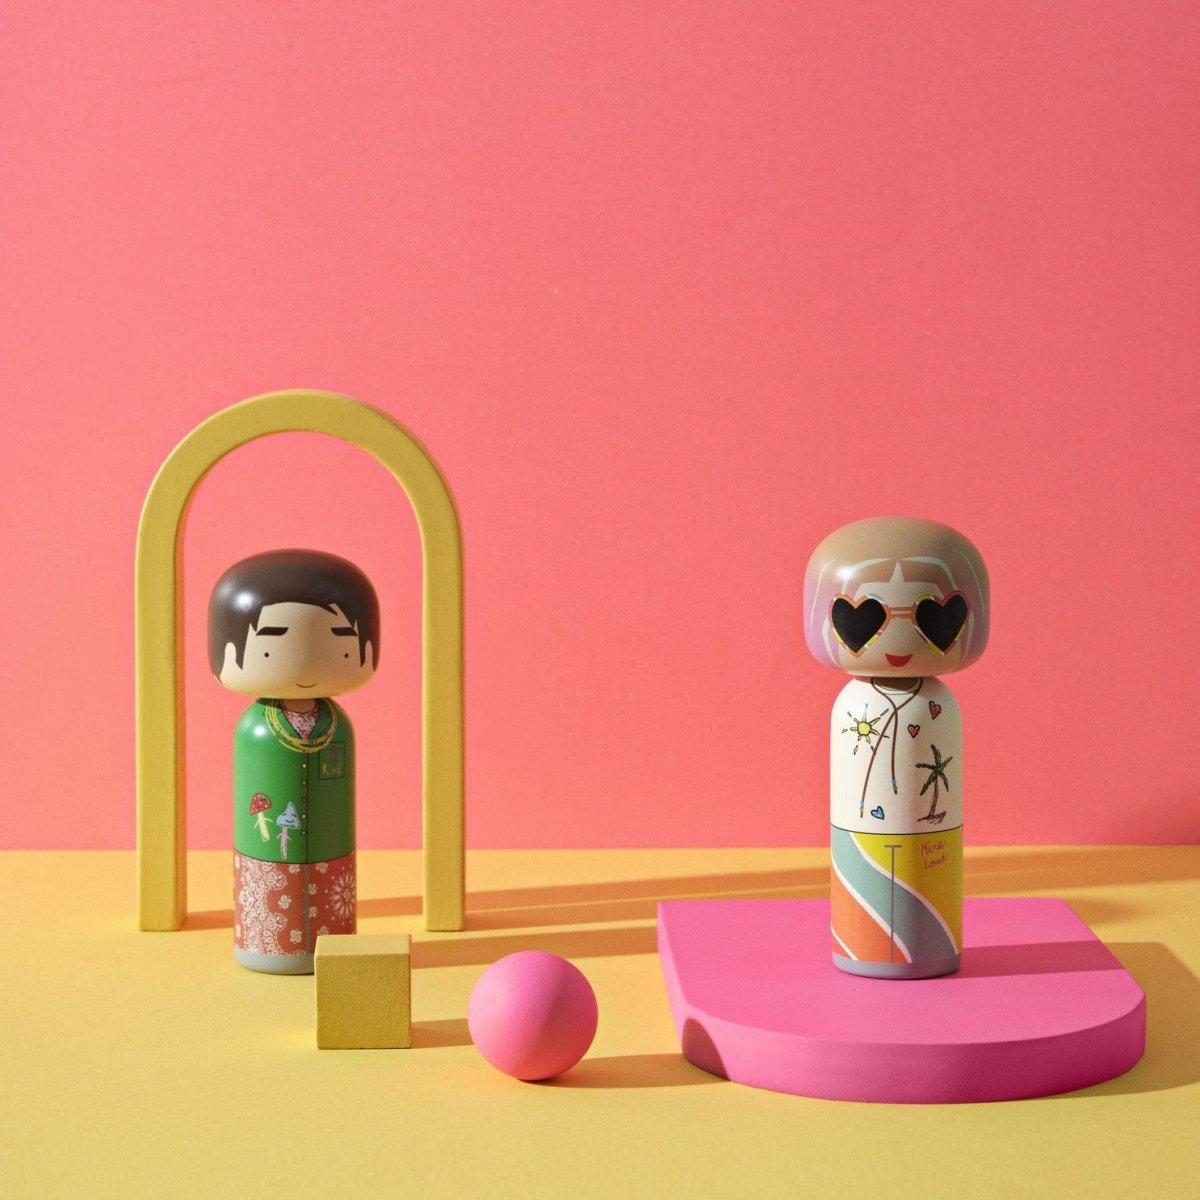 Mira Mikati and Gio Kokeshi dolls from Lucie Kaas' Mira Mikati collection in an orange setting with pink decorations